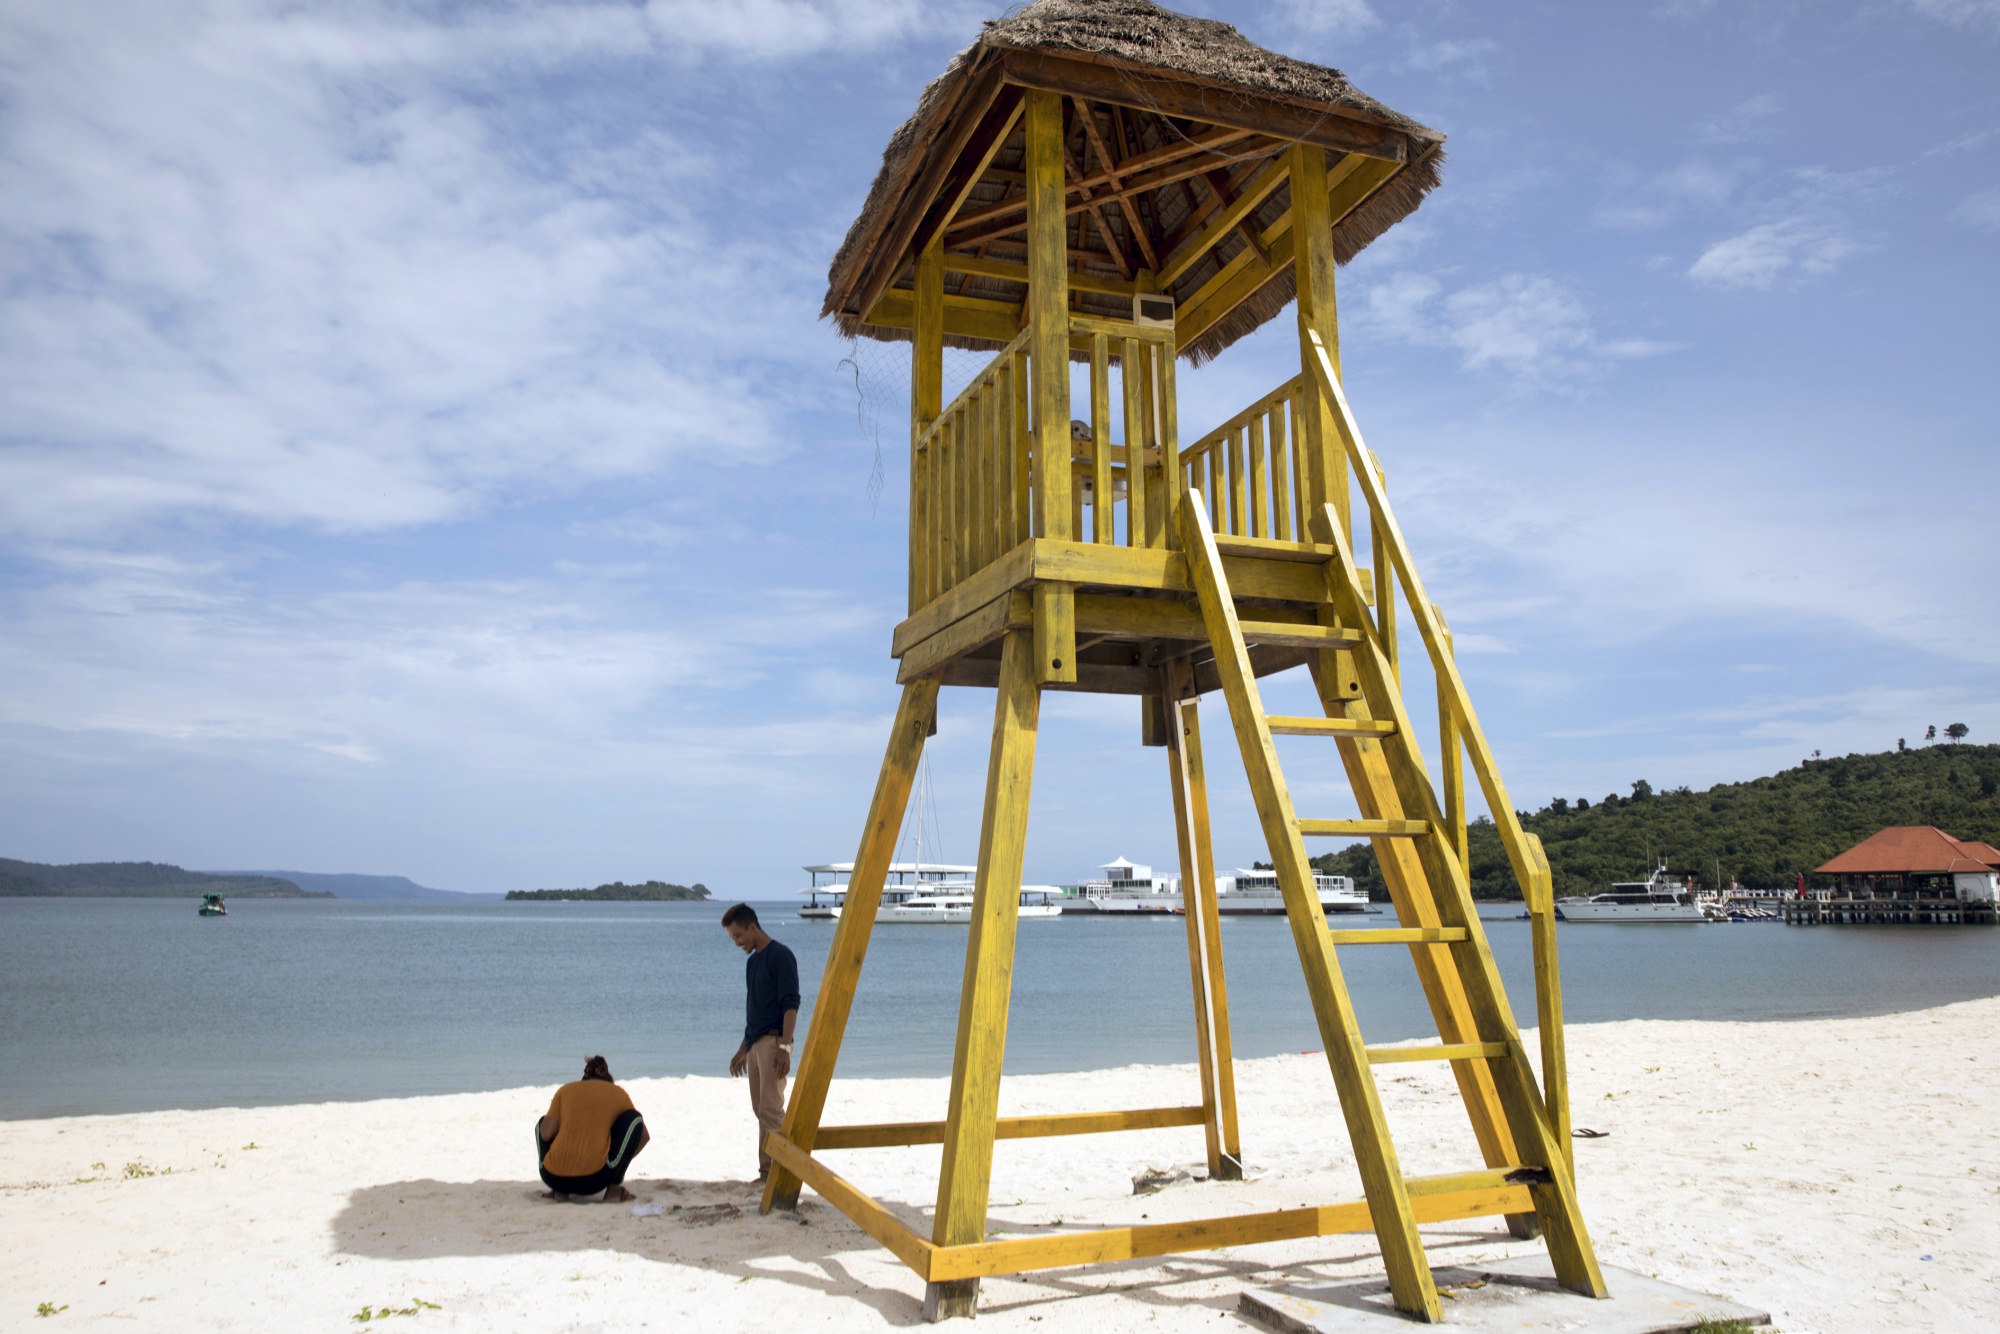 A lookout tower&nbsp;stands on the beach at Dara Sakor Seashore Resort in the Botum Sakor district of Koh Kong in&nbsp;Cambodia, on July 7, 2019.